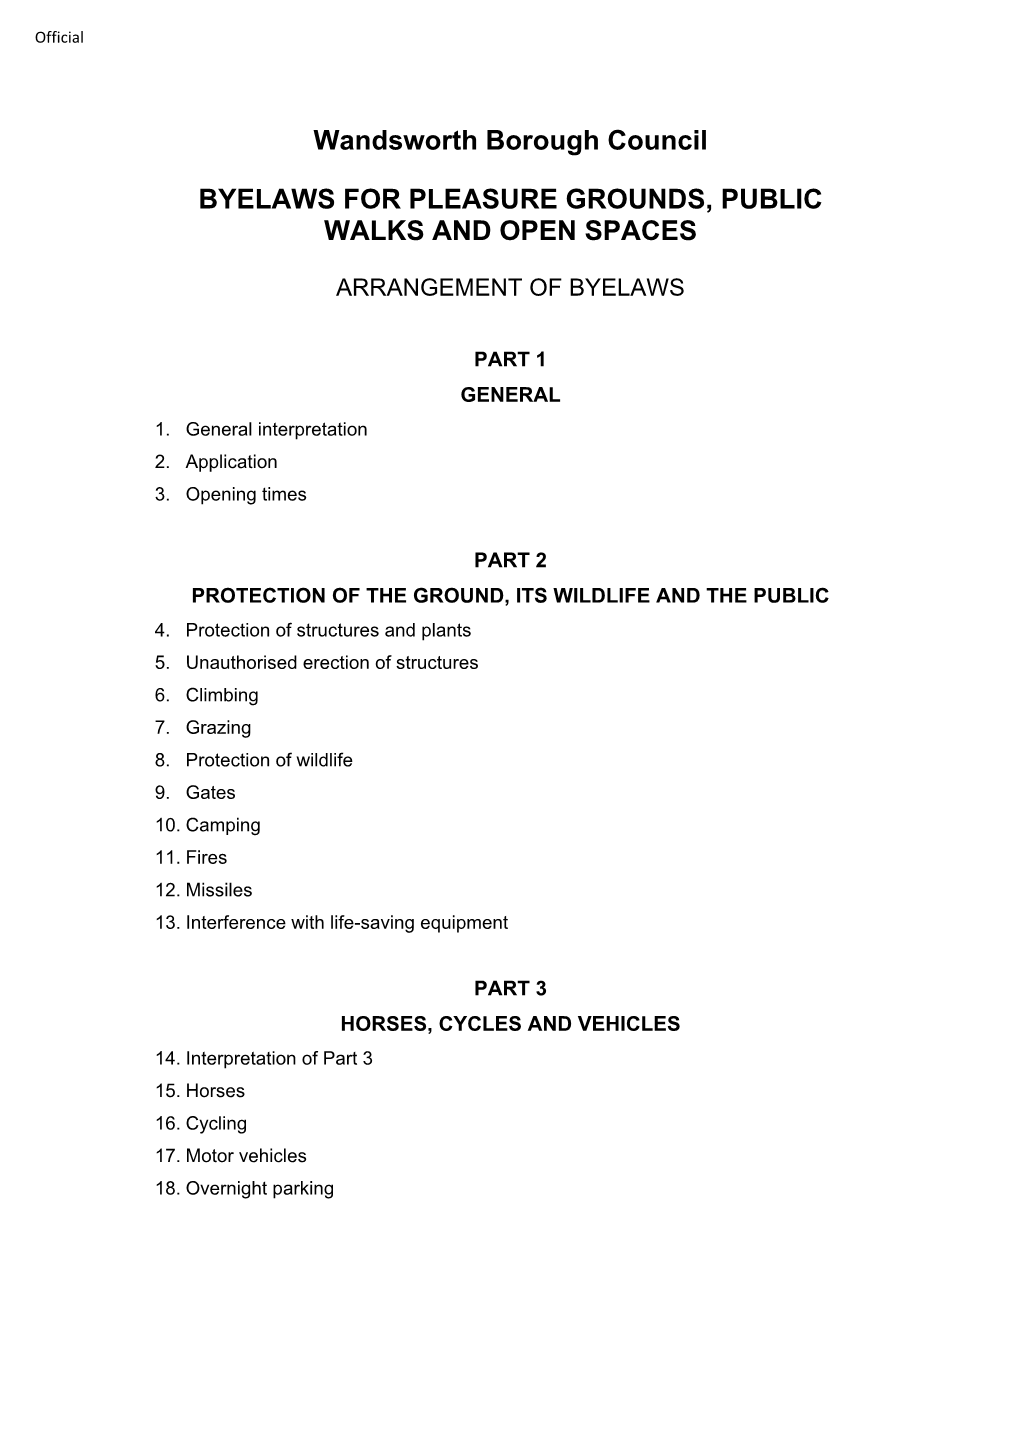 Wandsworth Council Parks and Open Spaces Byelaws